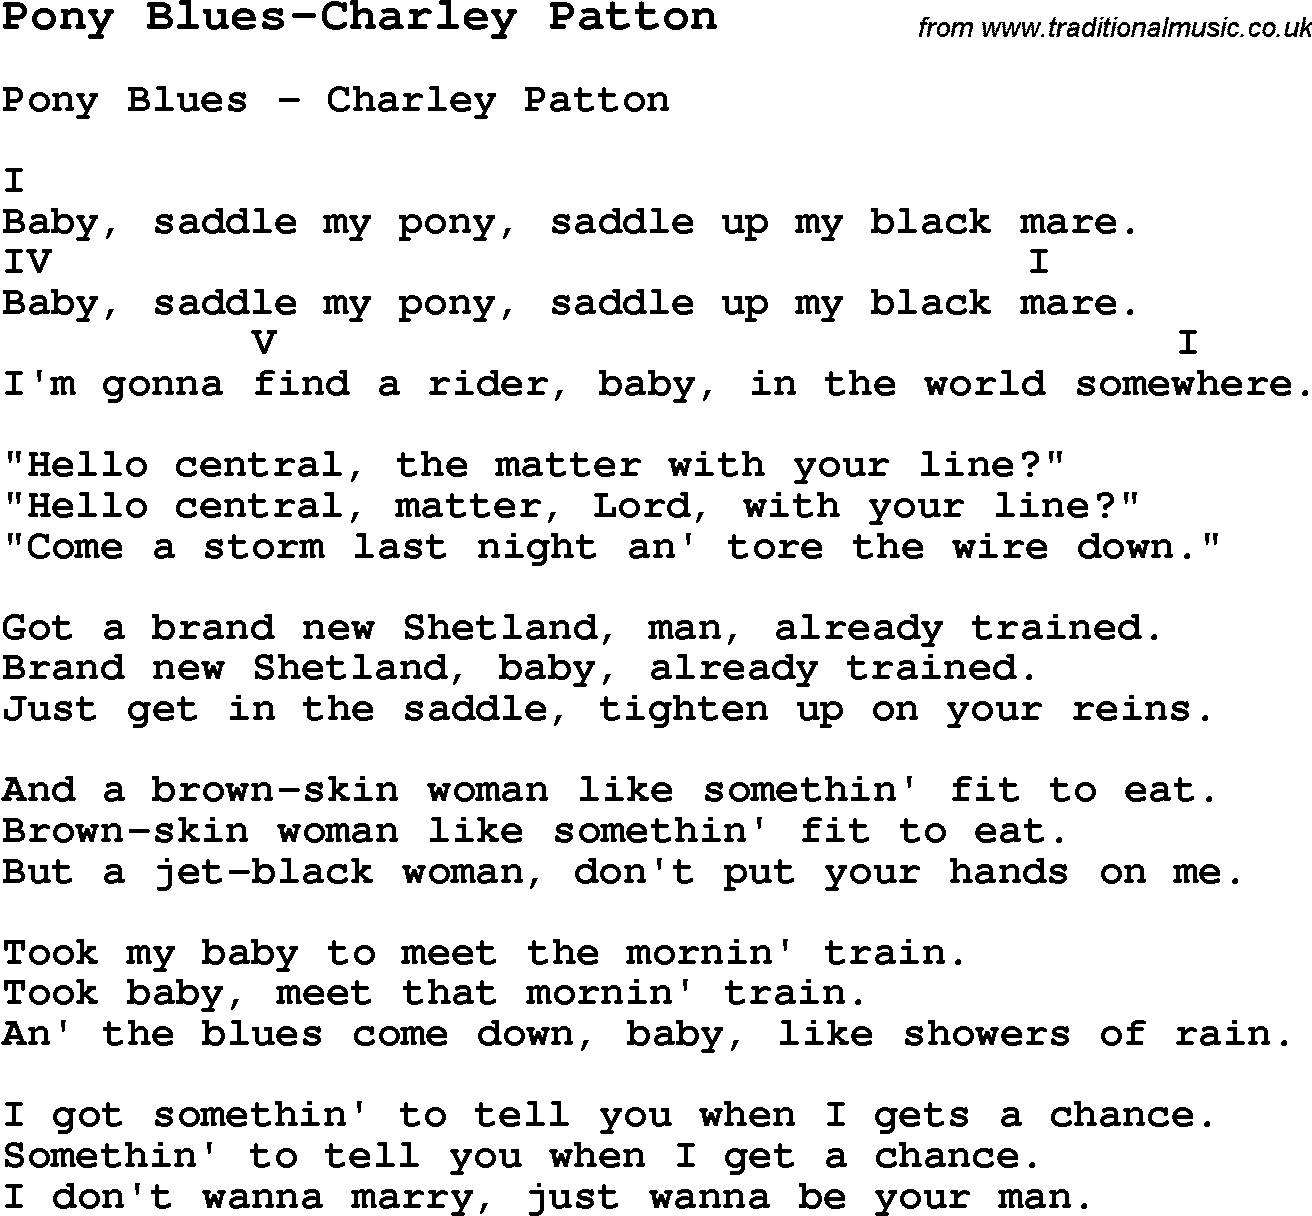 Blues Guitar Song, lyrics, chords, tablature, playing hints for Pony Blues-Charley Patton